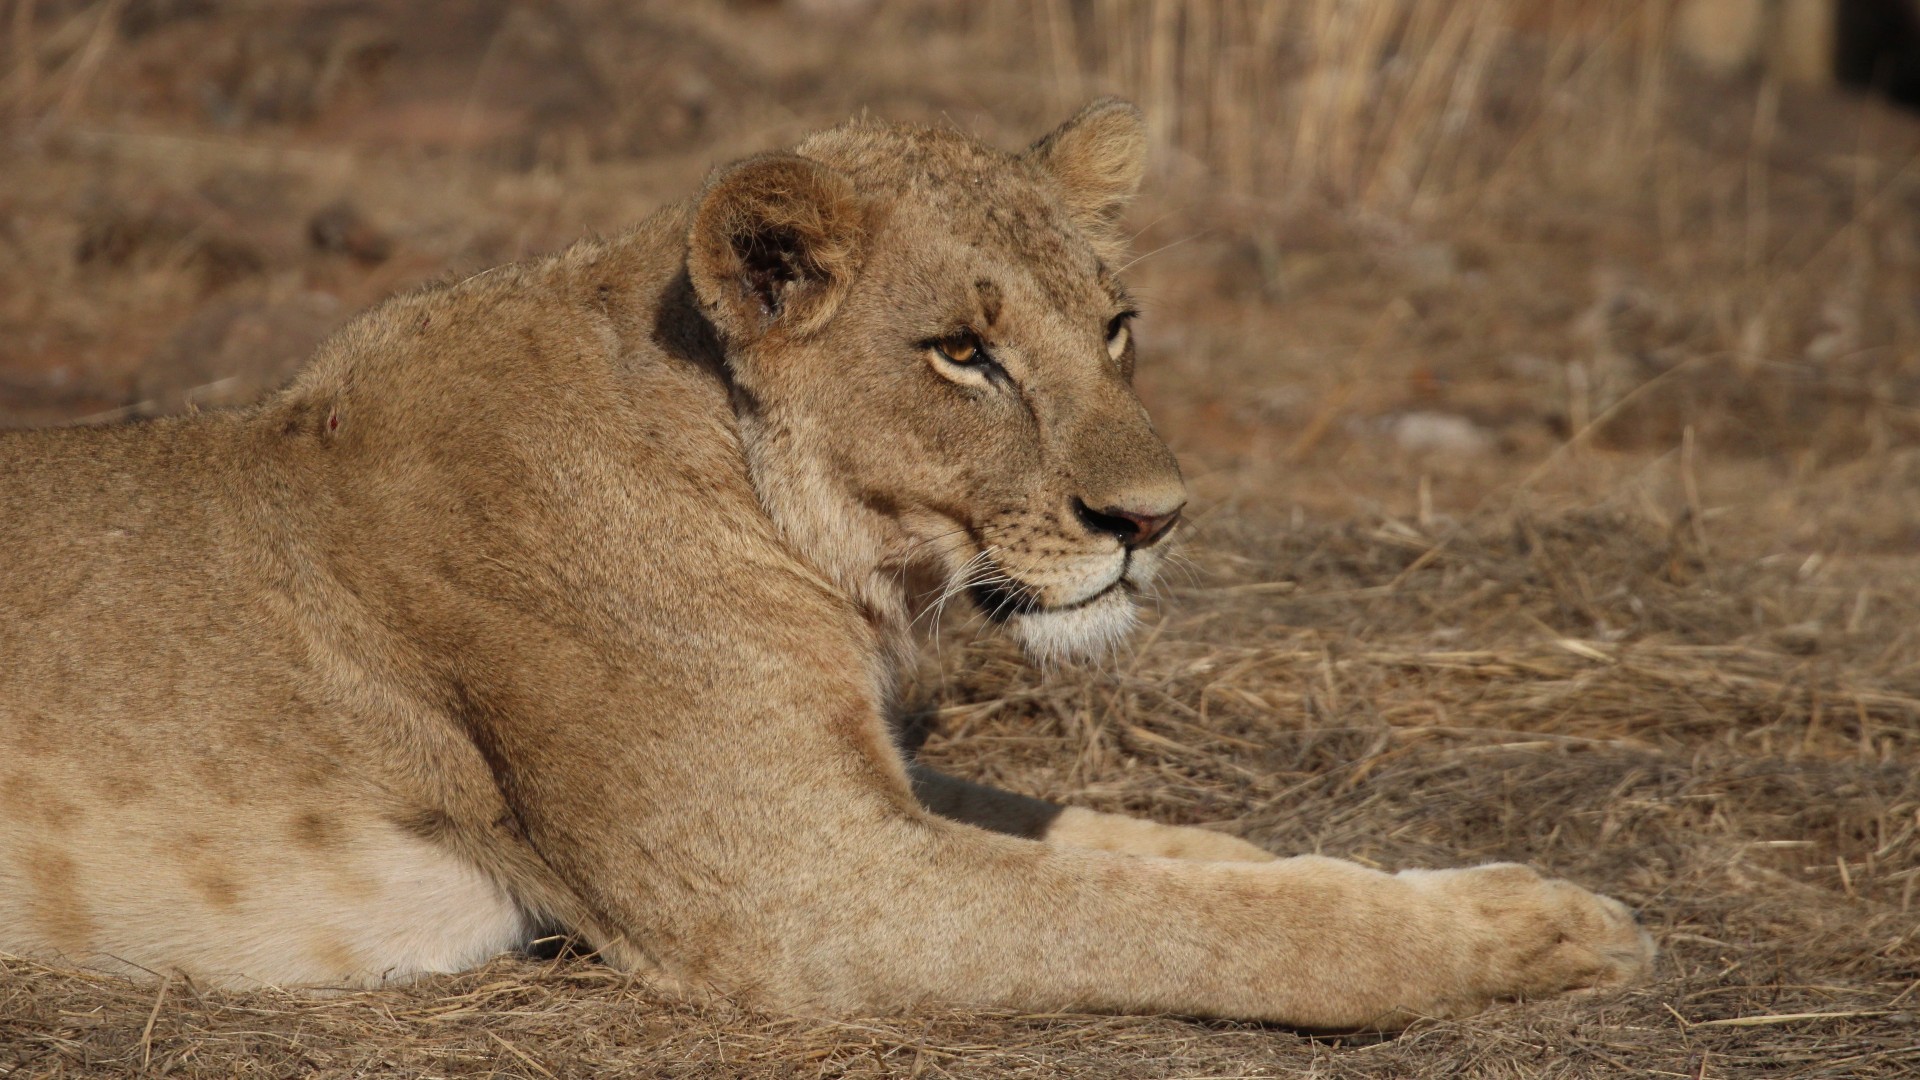 A young lioness lying down in dusty shrubland